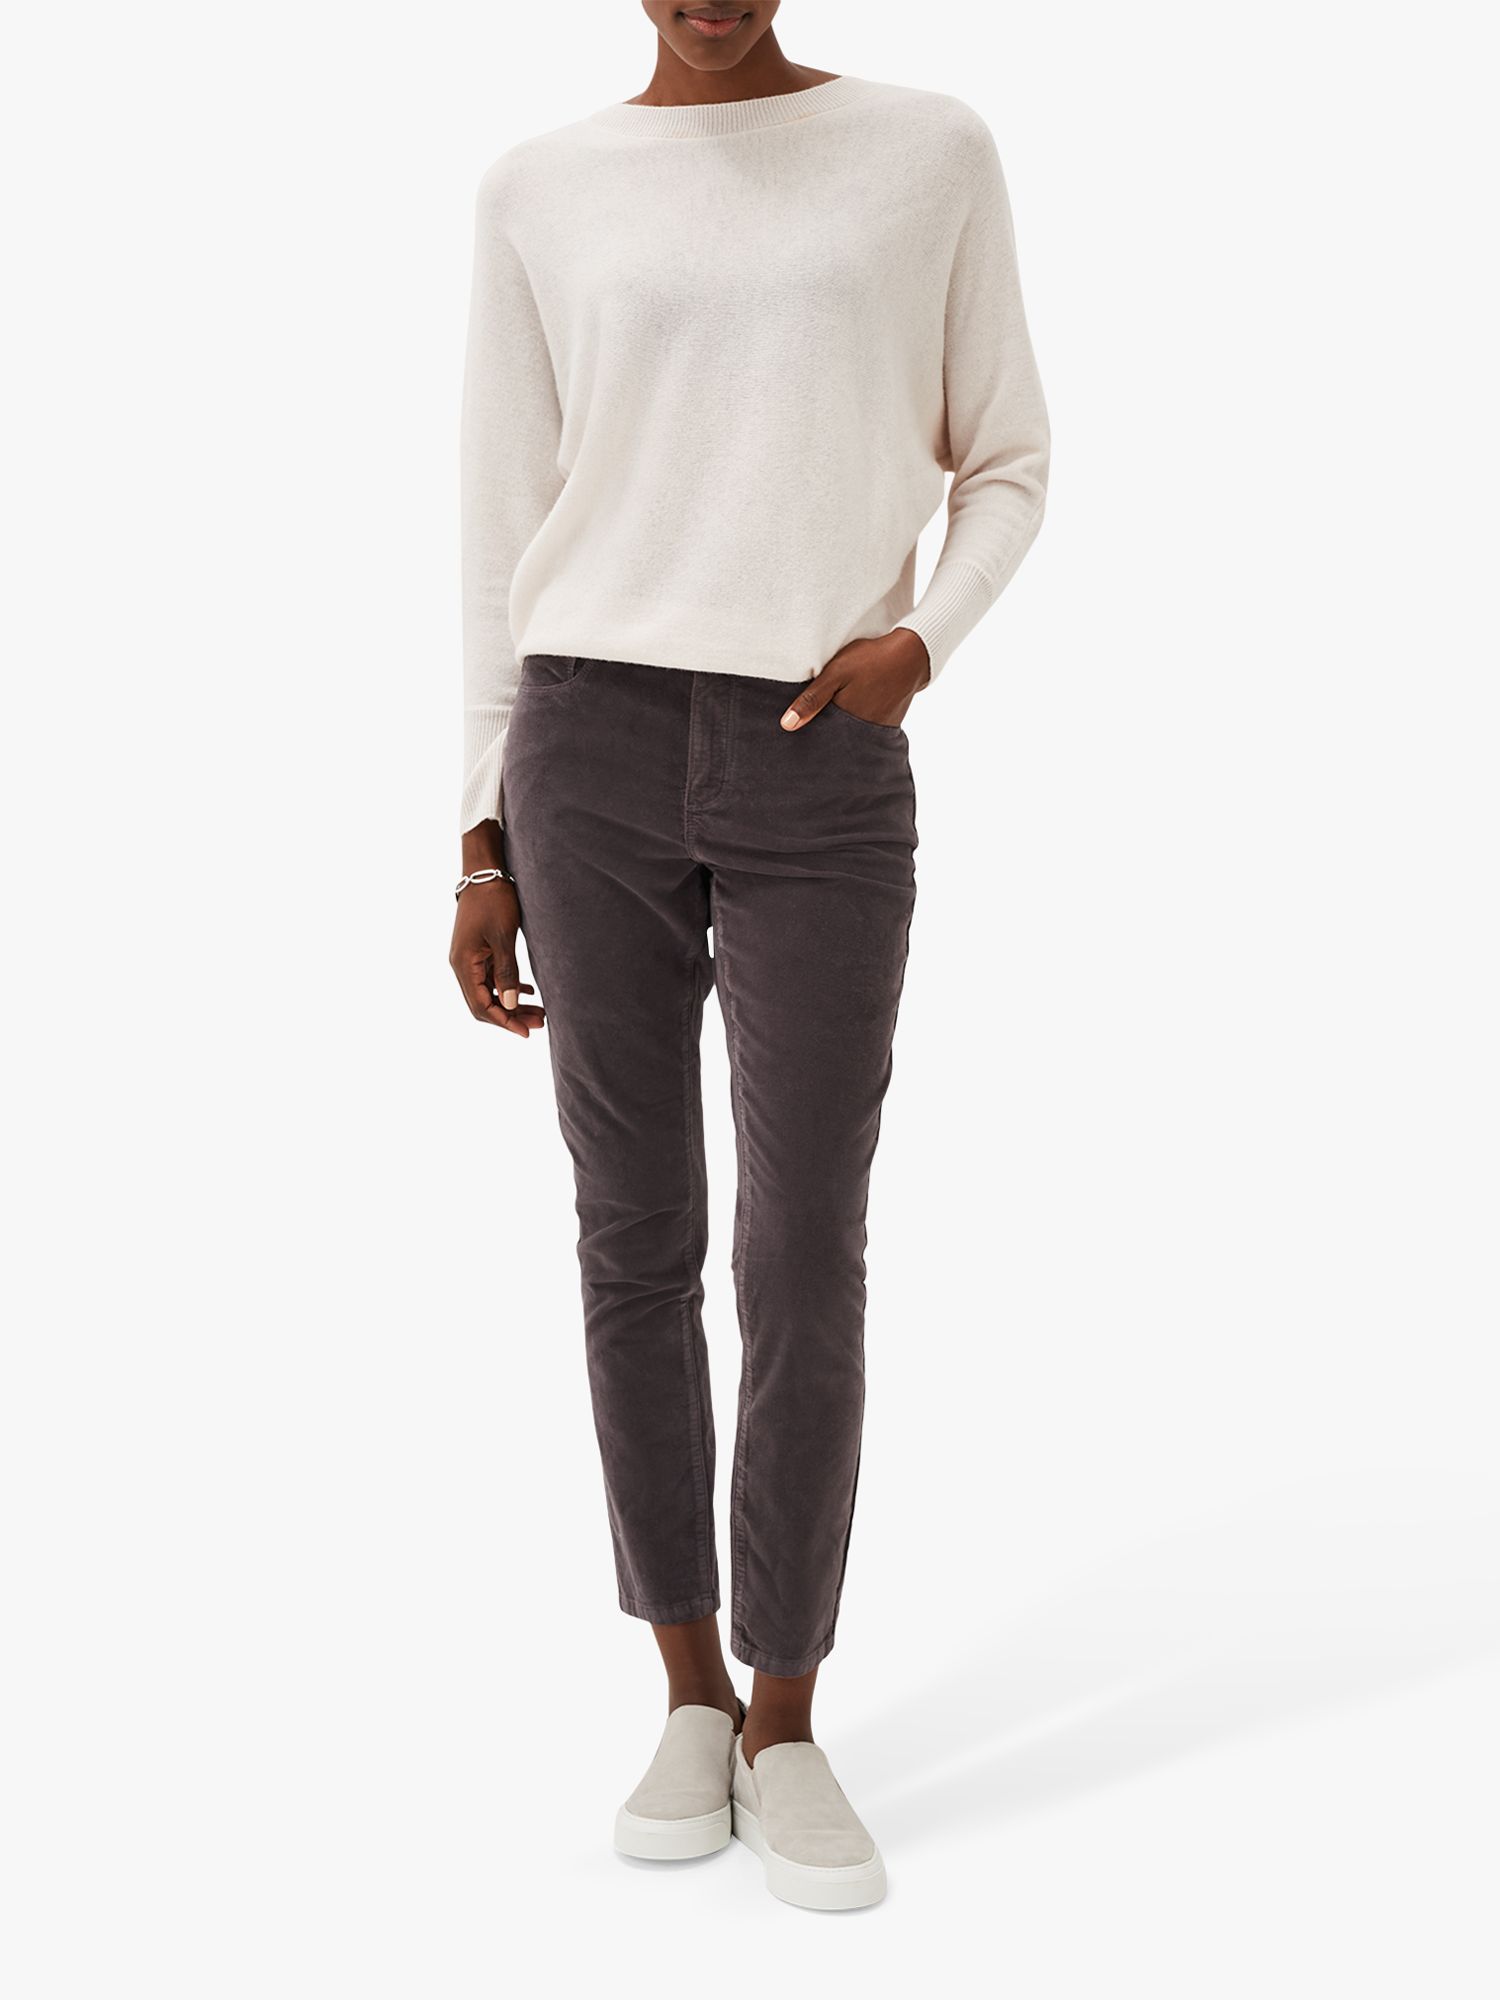 Buy Phase Eight Beatrice Cashmere Jumper Online at johnlewis.com